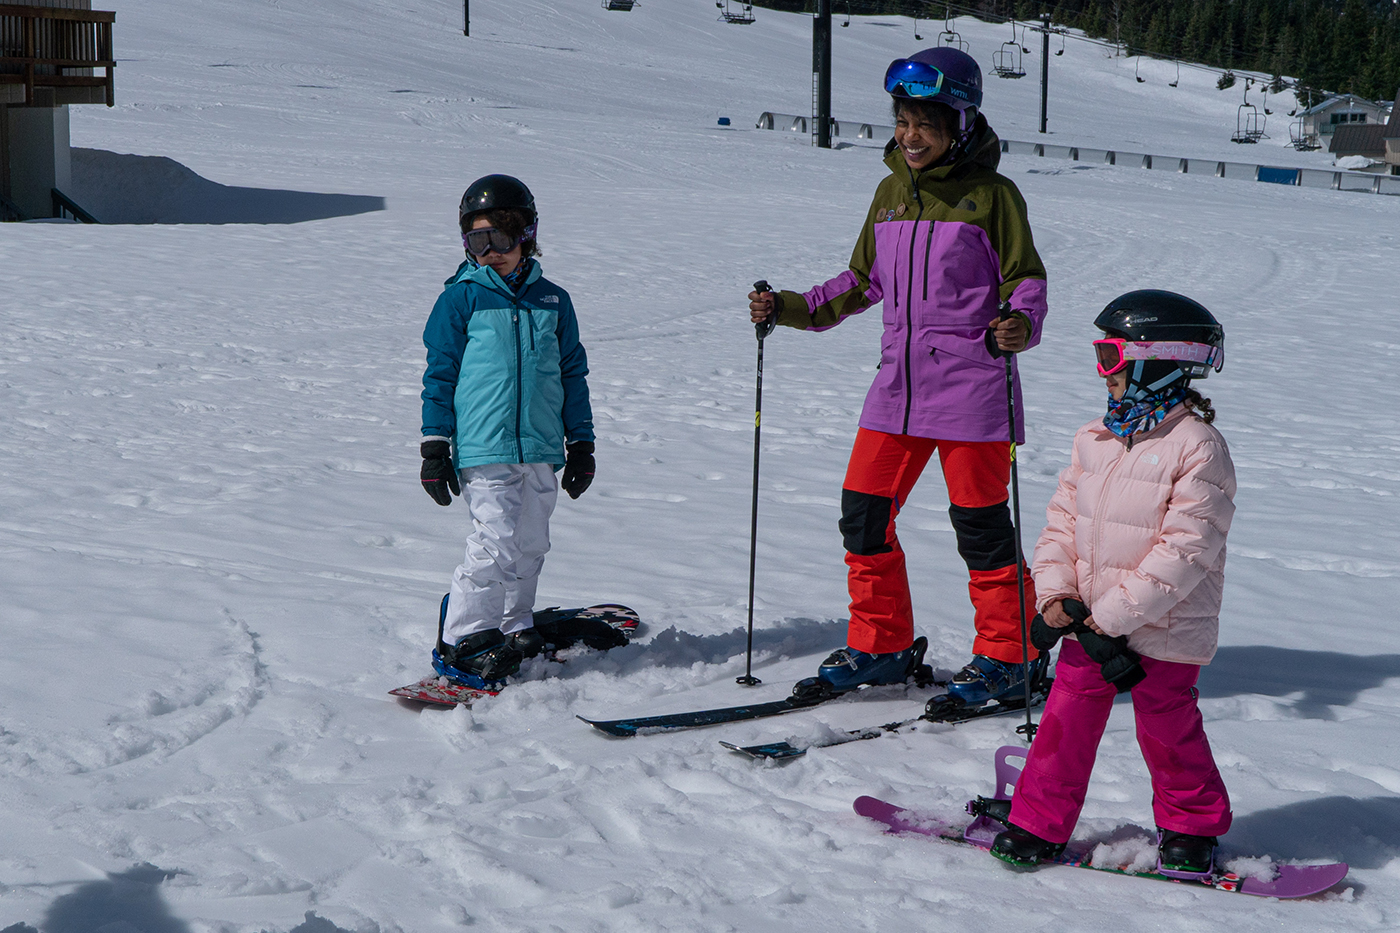 A family skis and snowboard